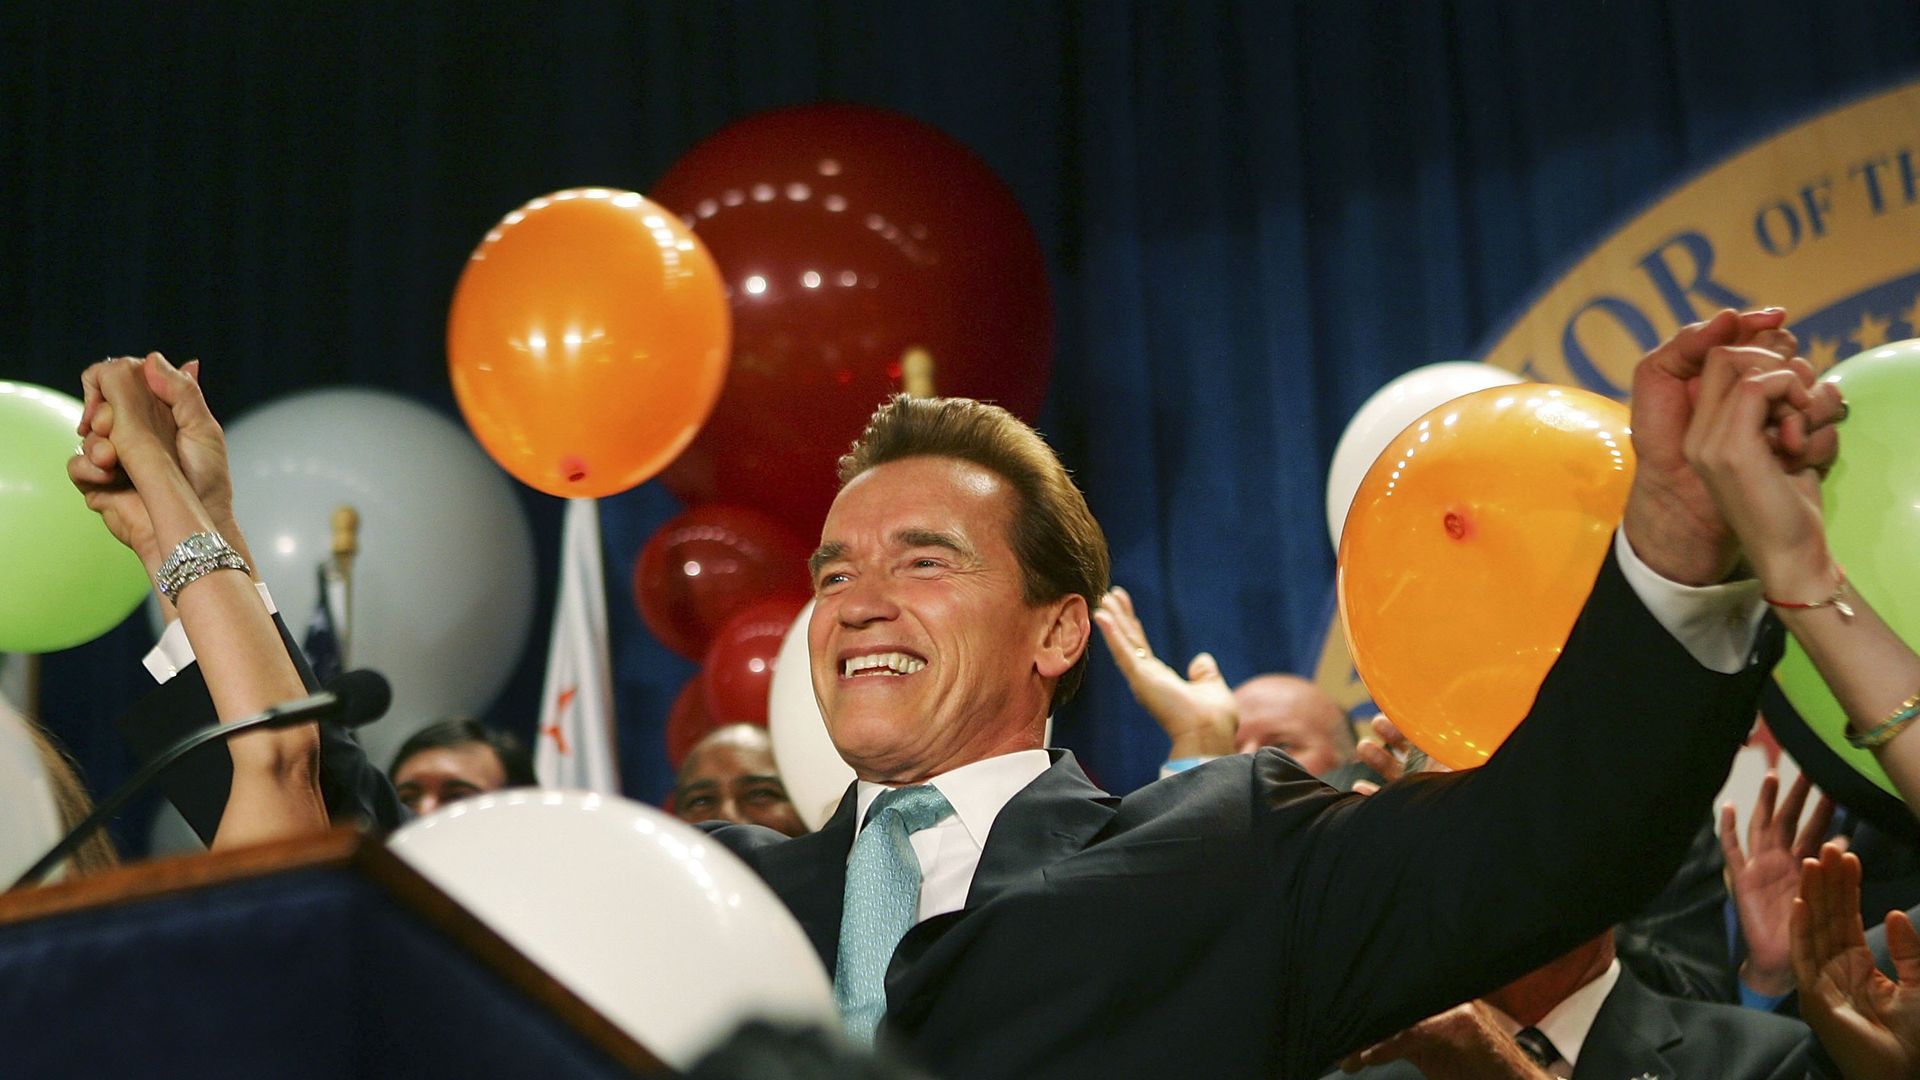 Schwarzenegger throws his hands in the air at a victory party